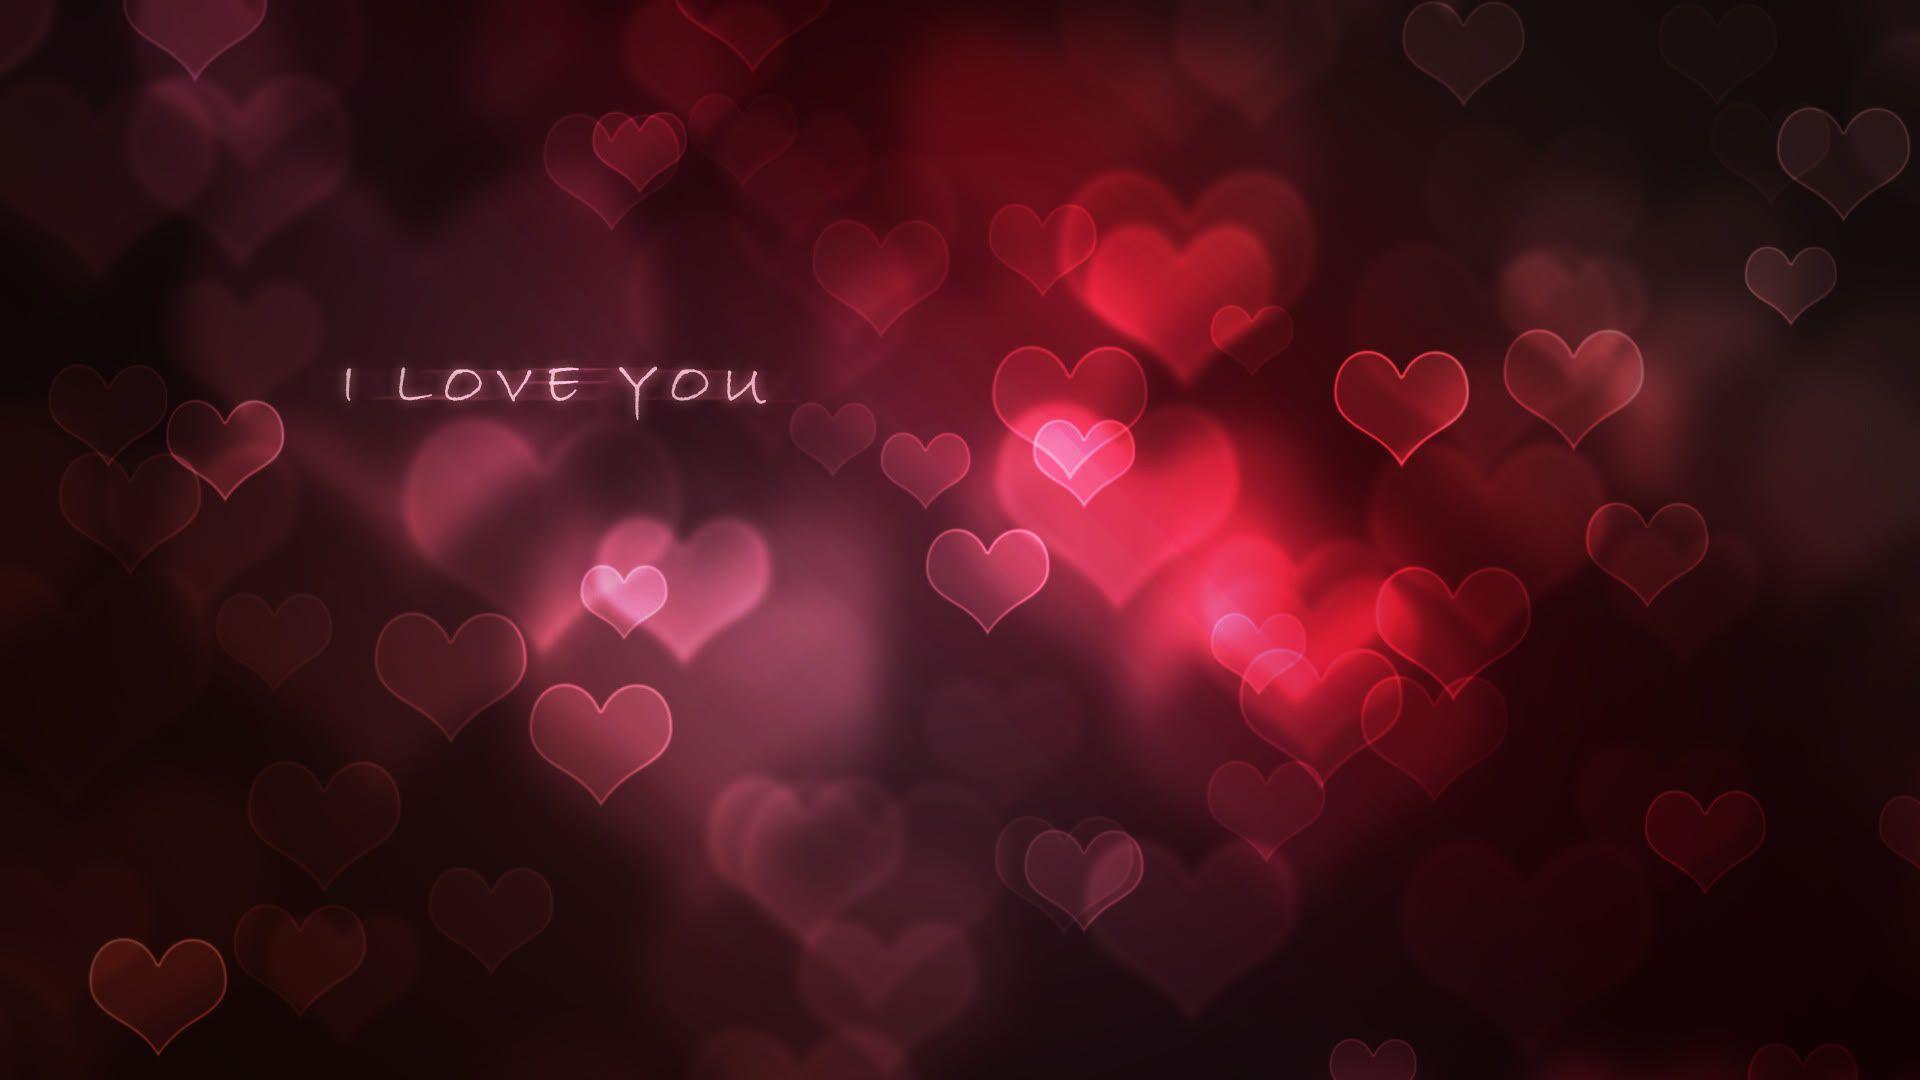 I Love You Background HD Wallpaper of Love. I love you picture, Love you image, Love wallpaper for mobile